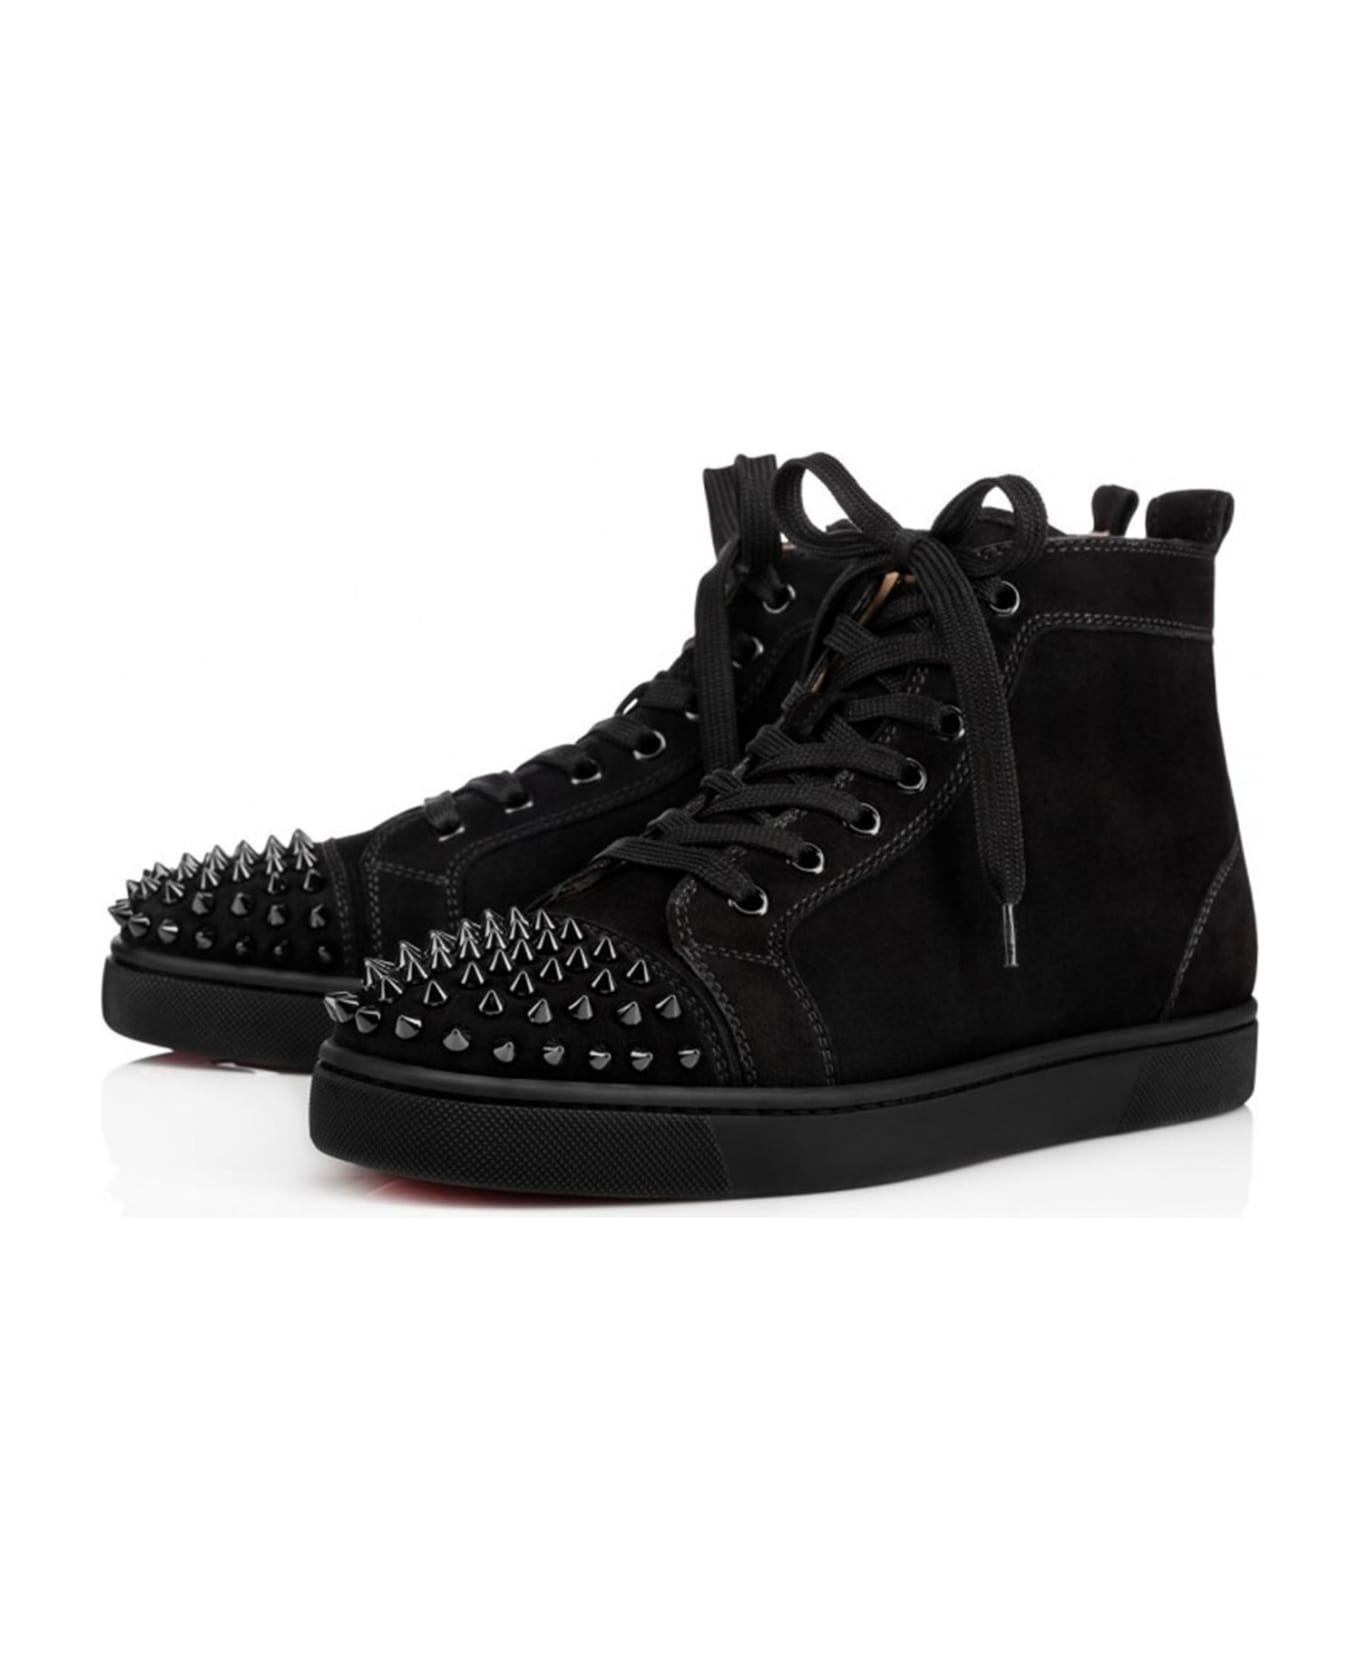 Christian Louboutin High-top Sneakers In Suede With Spikes - Black/black/bk